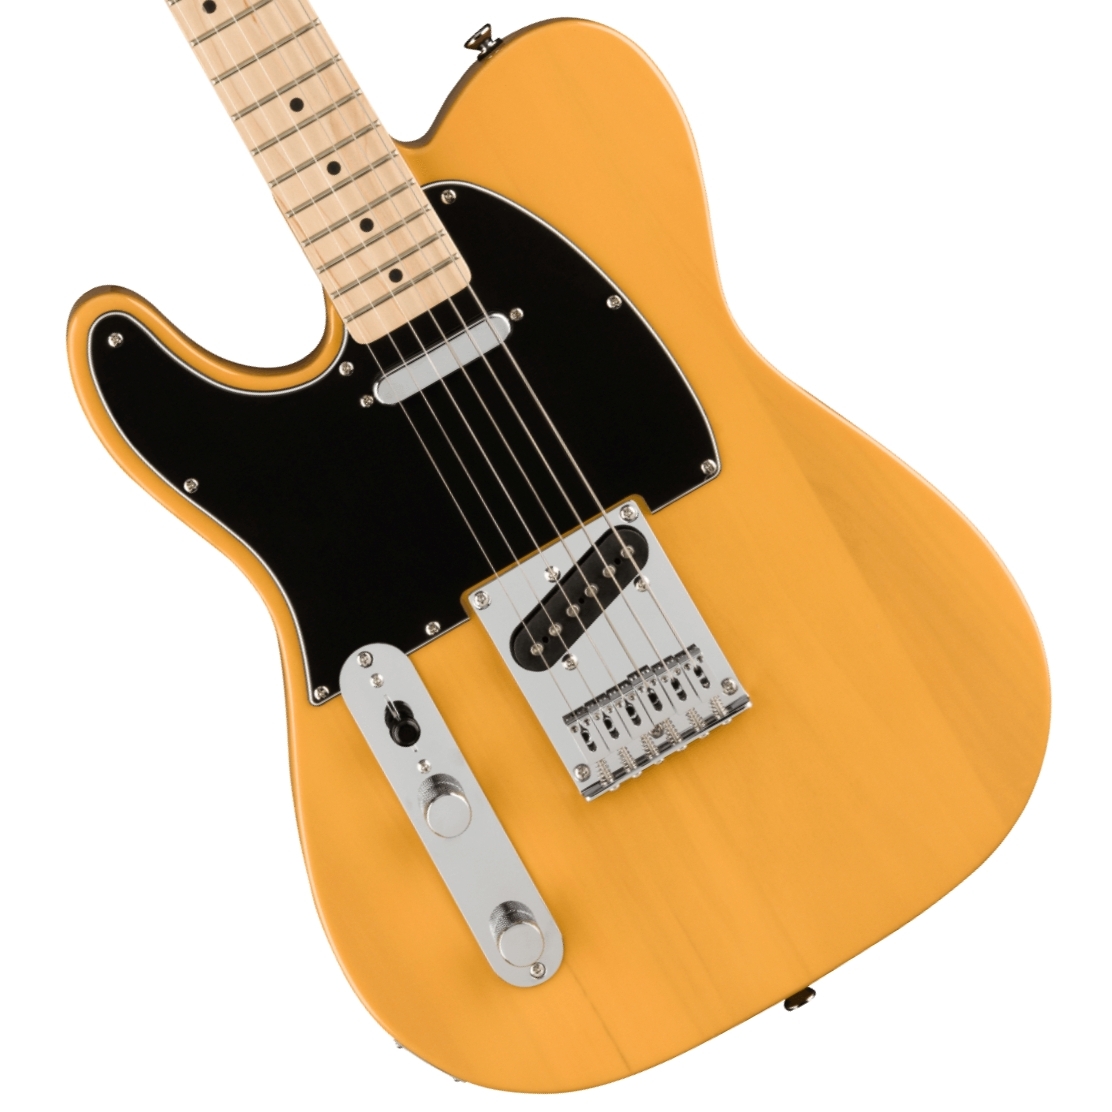 Squier by Fender / Affinity Series Telecaster Left-Handed Maple